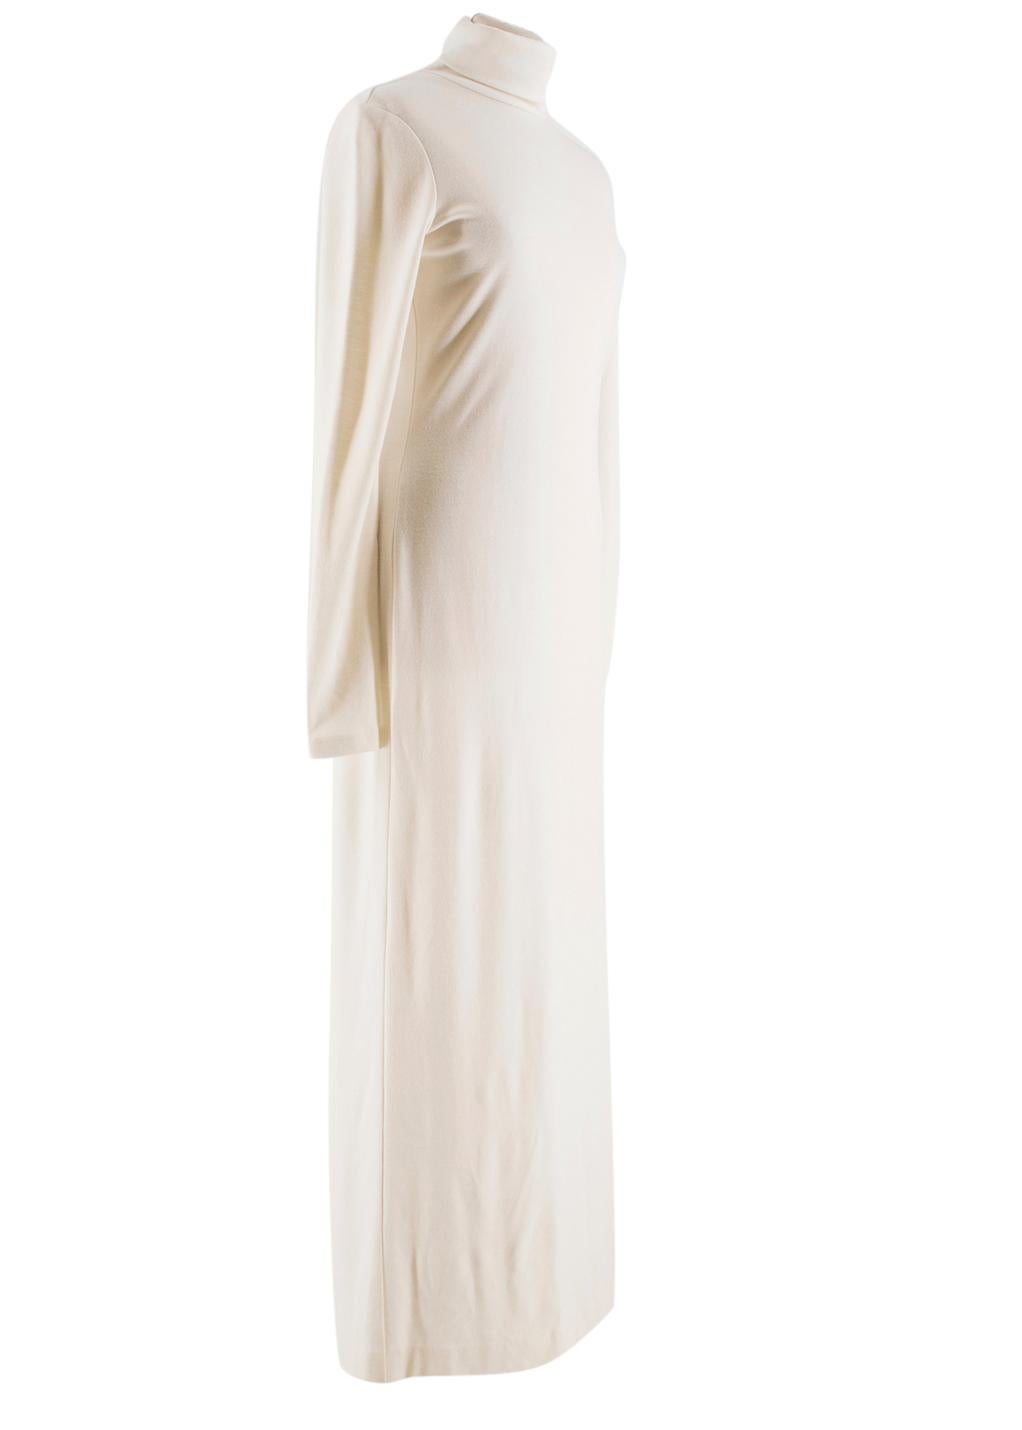 Calvin Klein Turtleneck Long Dress in Wool Jersey 

- White, heavy-weight long sleeves, long dress 
- Crafted from luxury wool jersey 
- Designed with a turtleneck, '205W39NYC' embroidery and a long silhouette
- Centre back slit
- 100% virgin